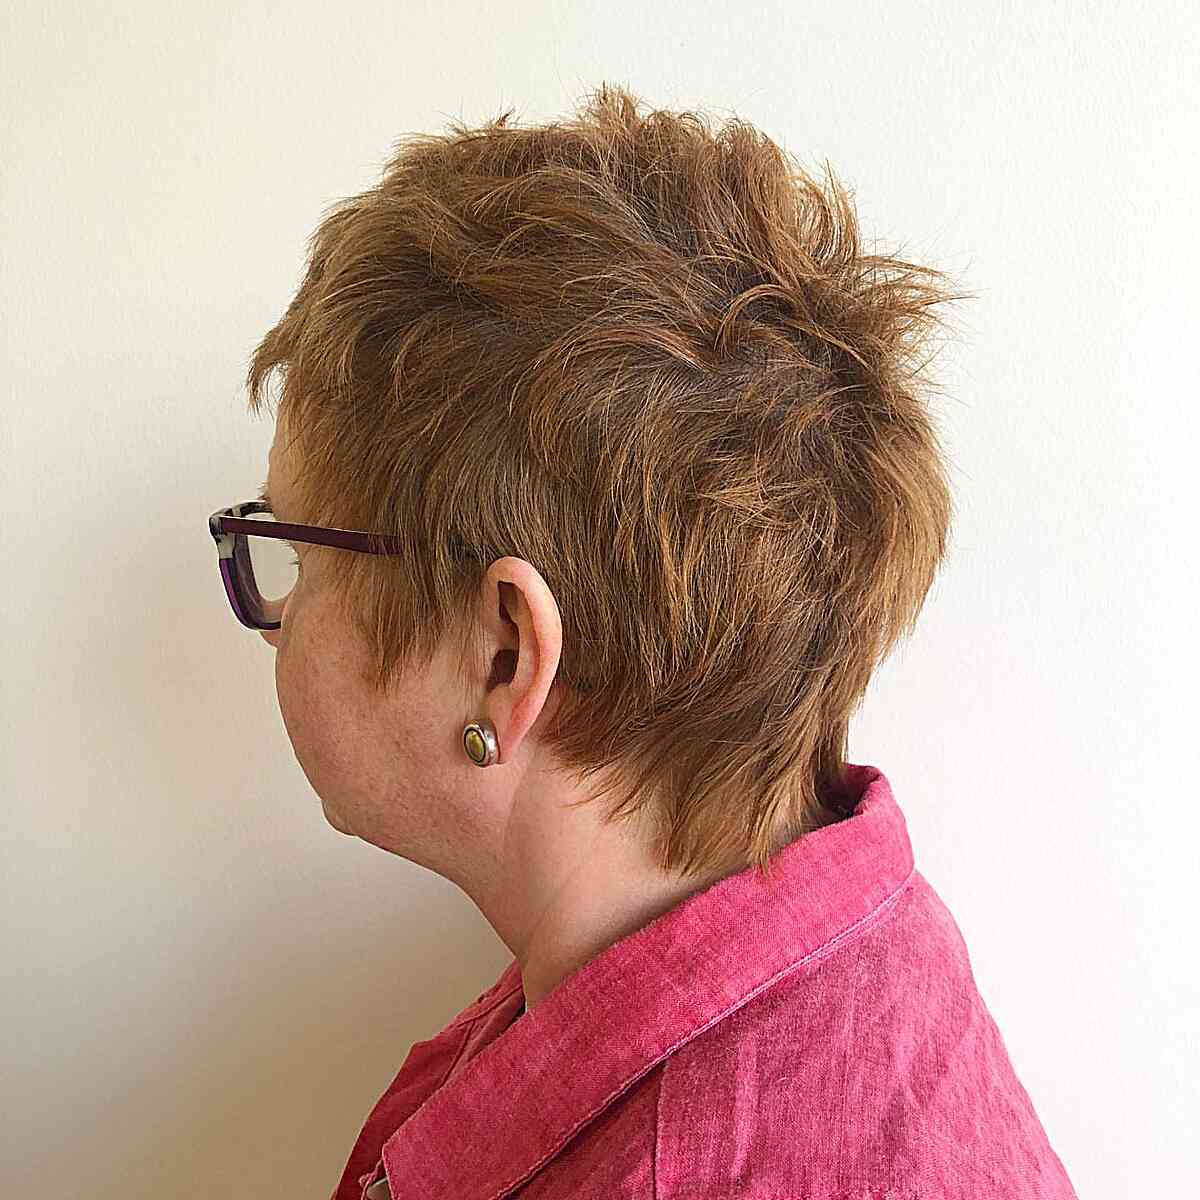 Short Textured Pixie Haircut for Mature Women Over Fifty with Thin Hair